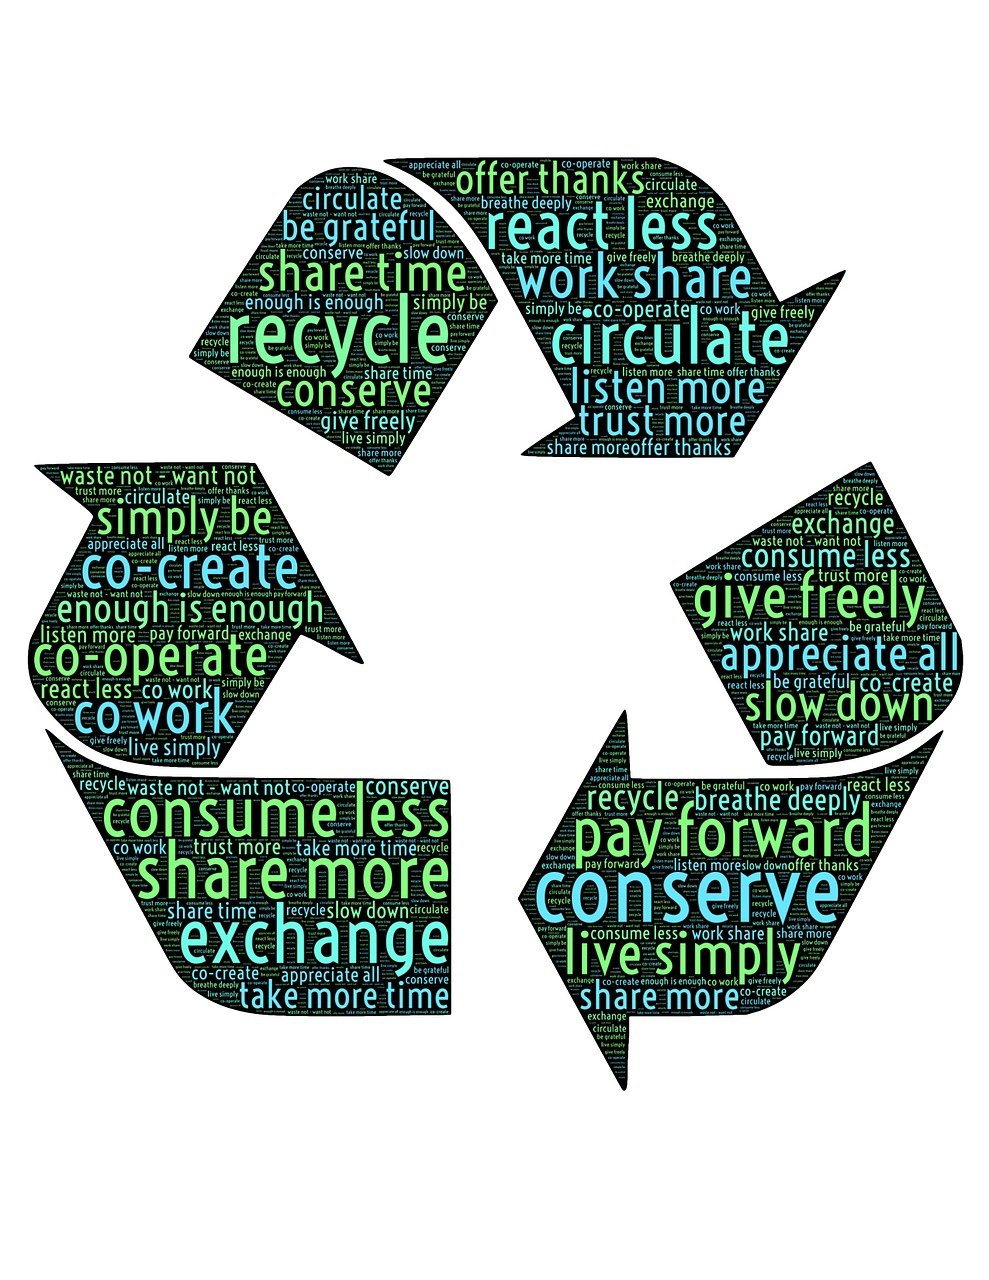 Image title: Event Planning Image alt-title: recycle-recirculate-share Image URL: https://pixabay.com/illustrations/recycle-recirculate-share-555645/ 